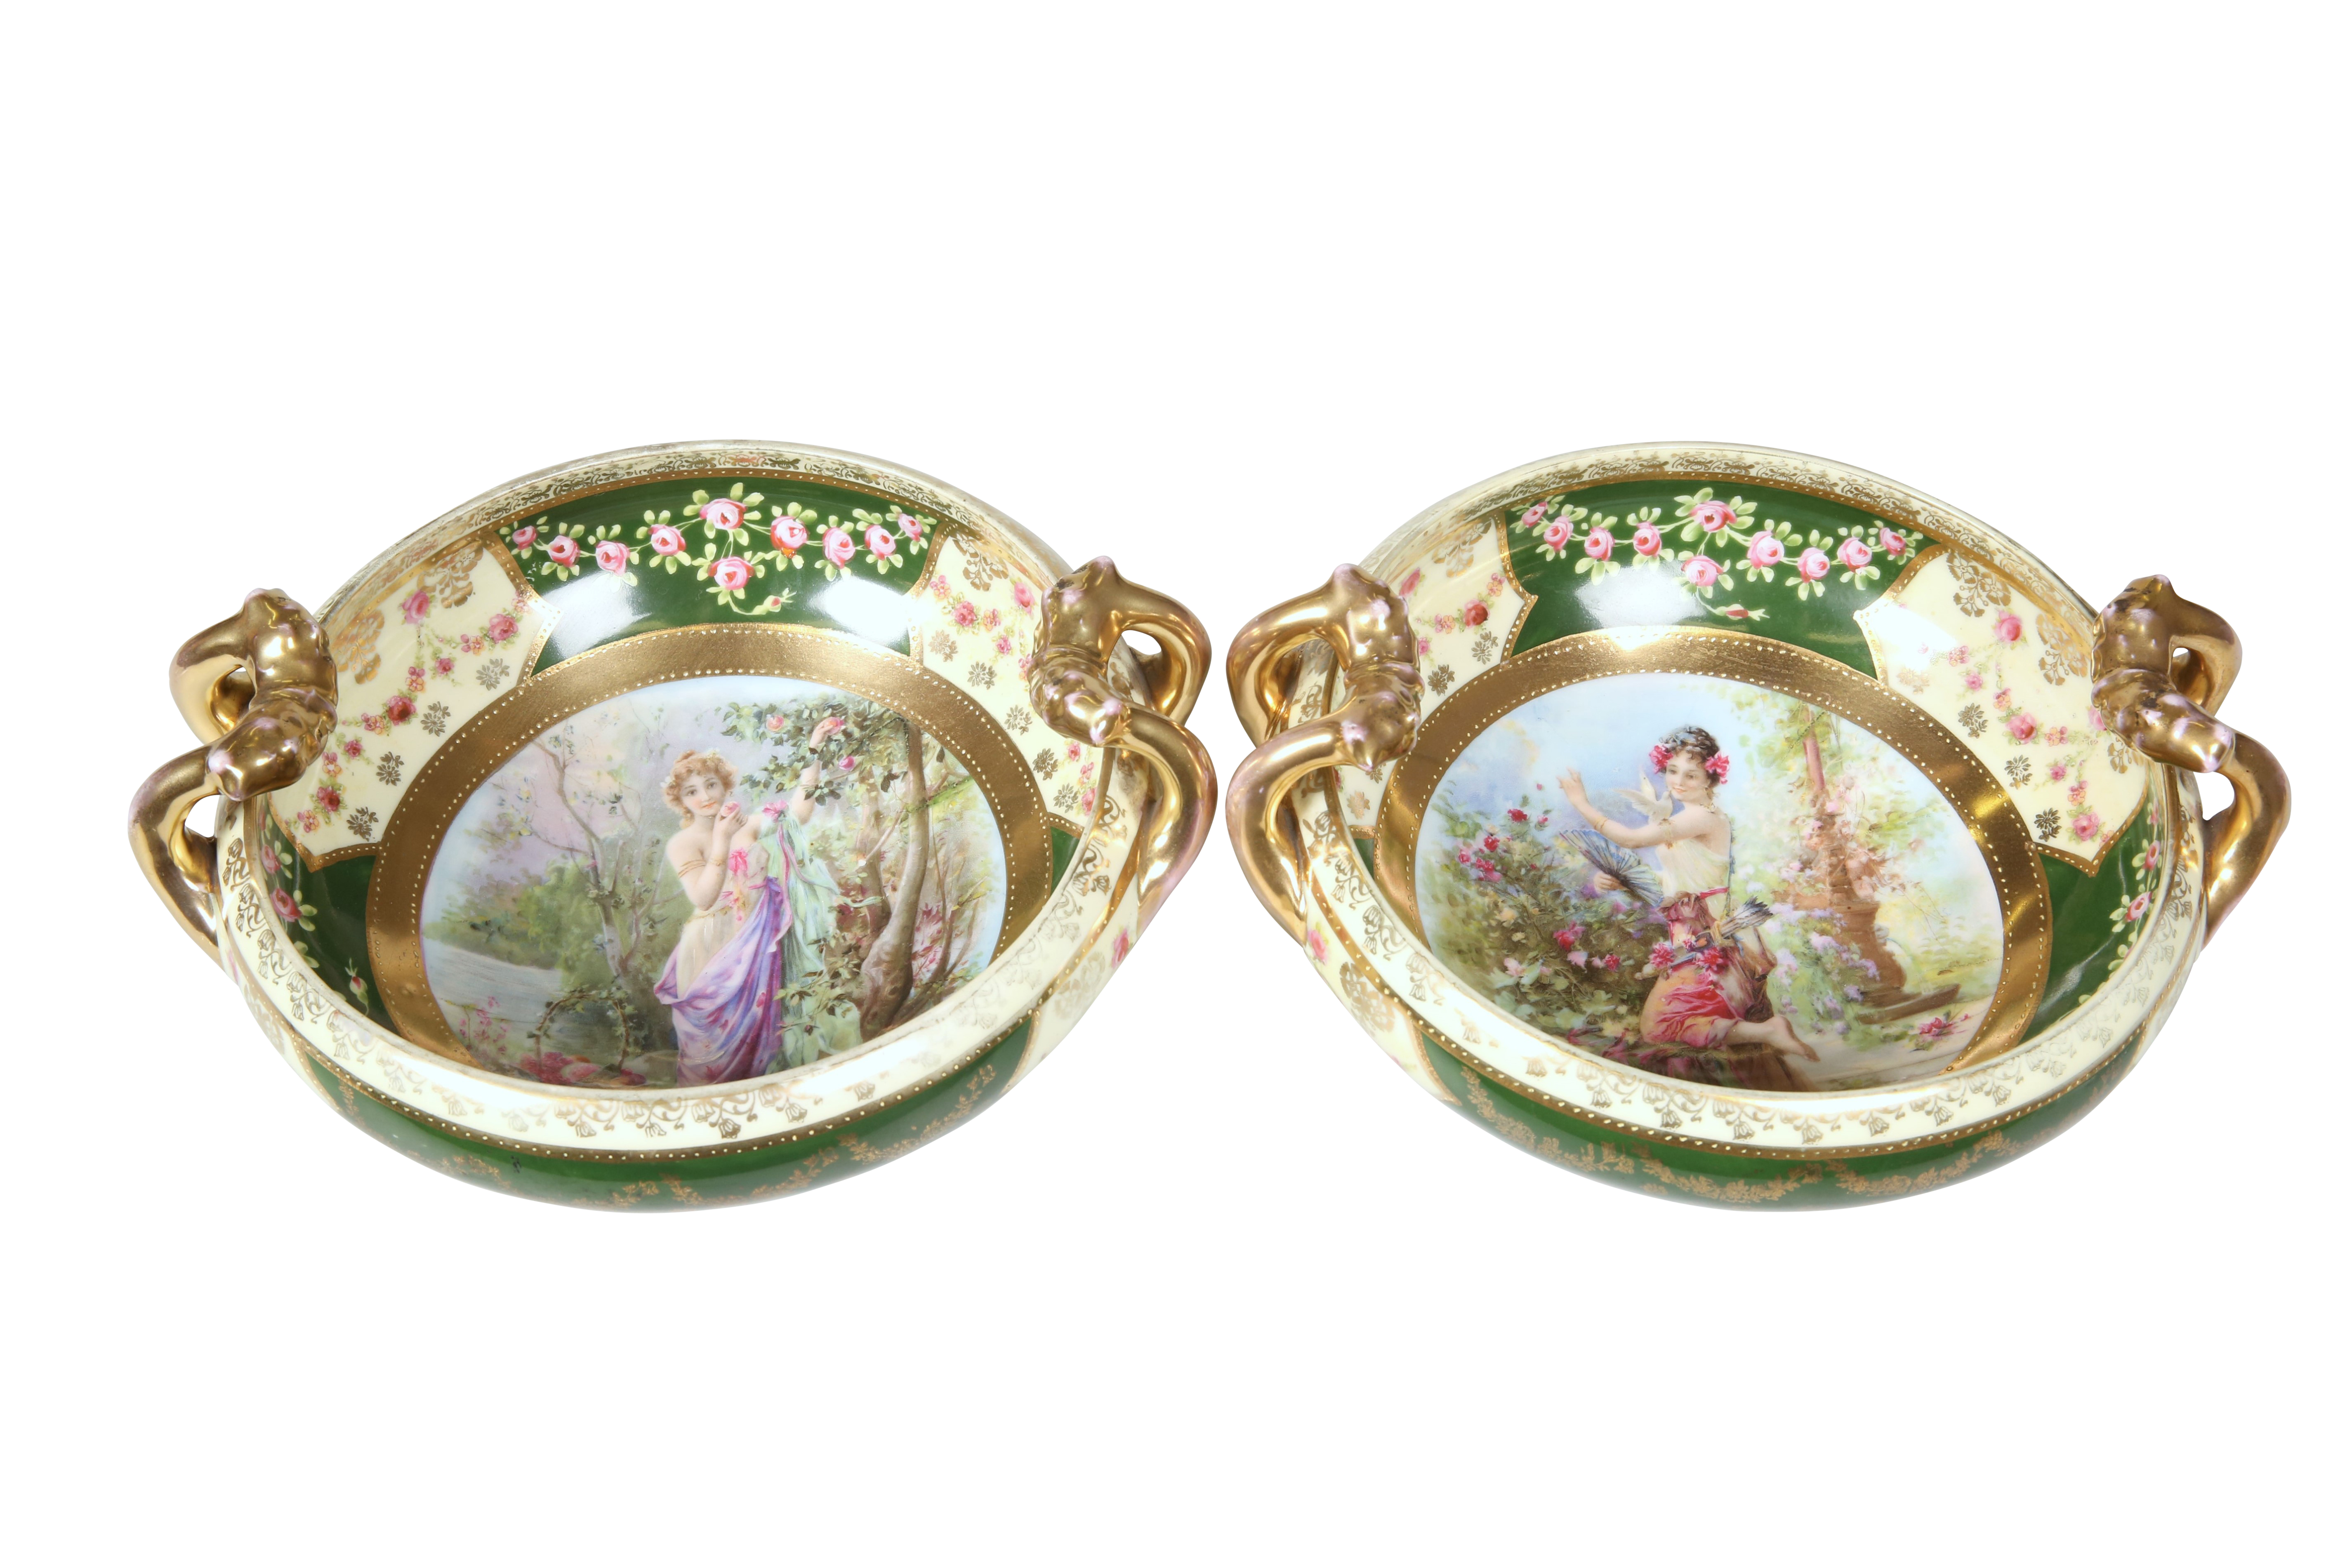 A PAIR OF CONTINENTAL PORCELAIN TWO-HANDLED BOWLS